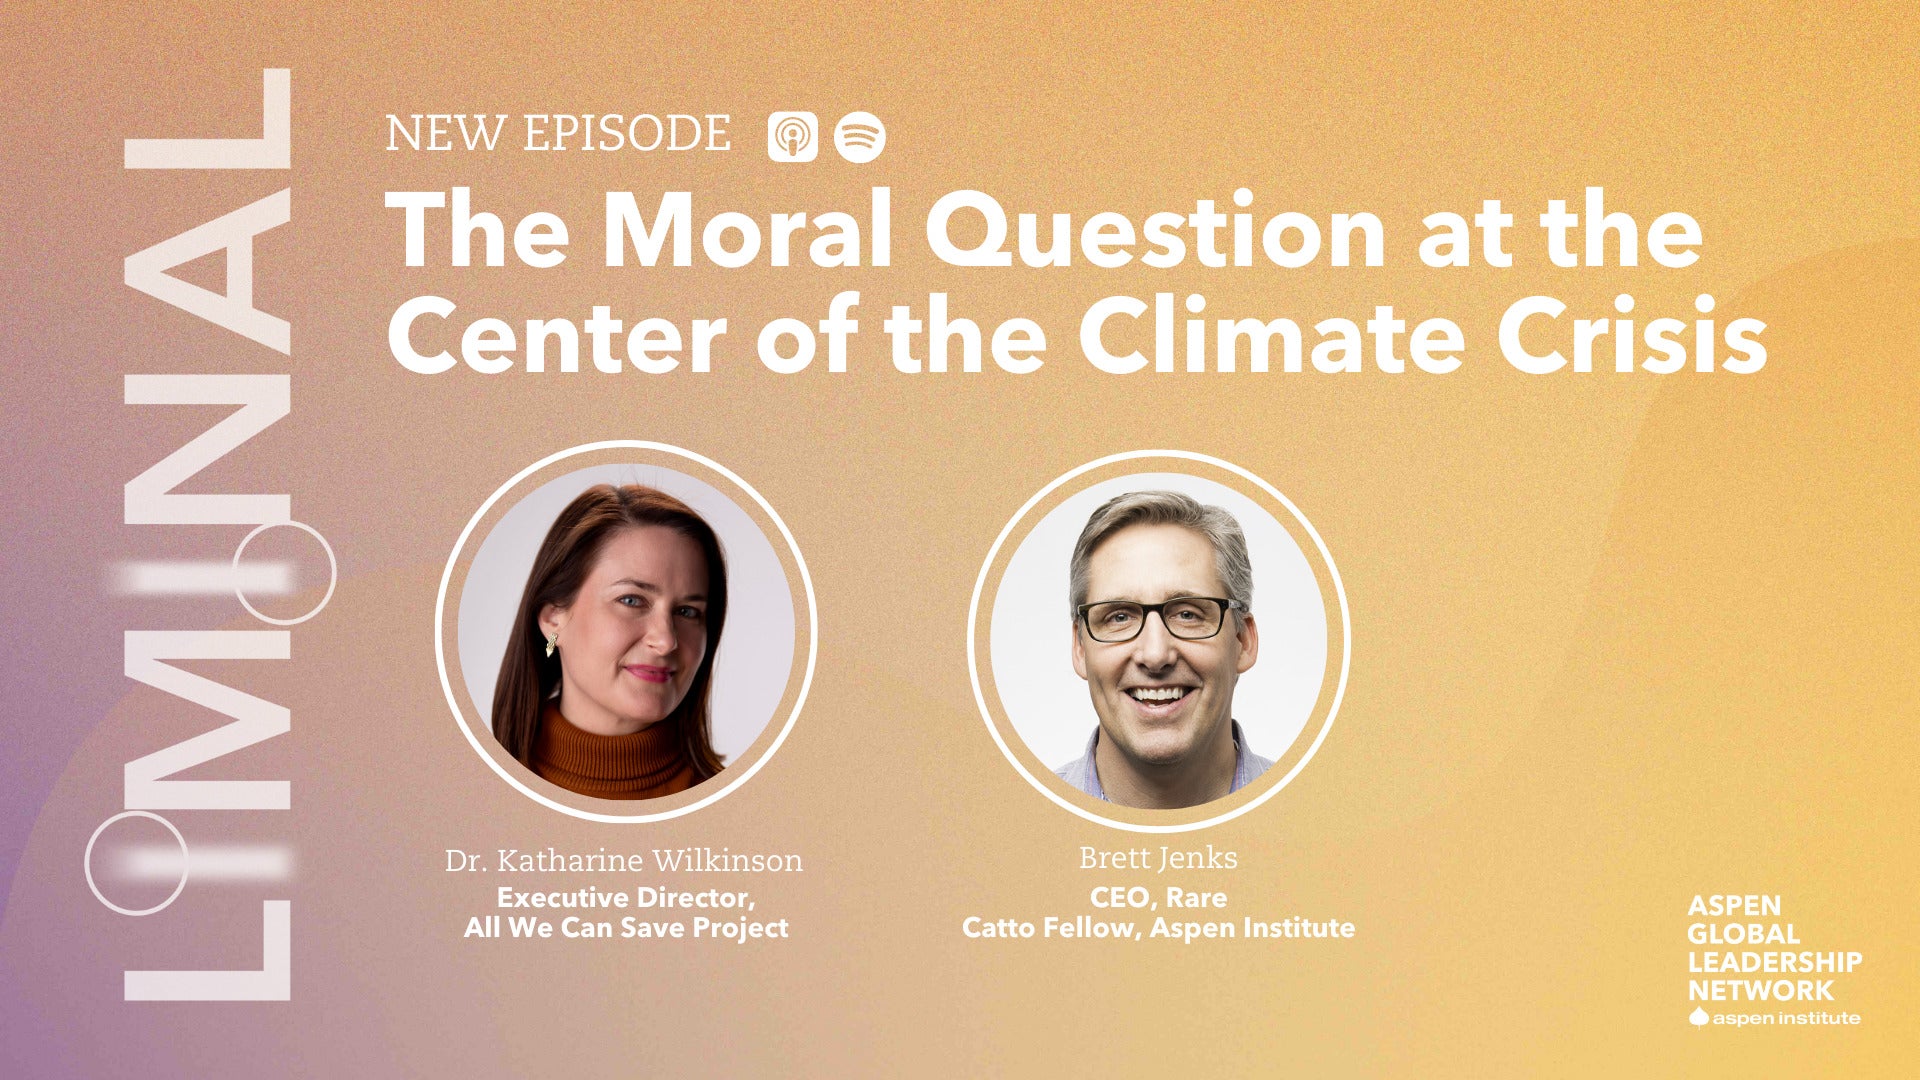 The Moral Question at the Center of the Climate Crisis with Katharine Wilkinson and Brett Jenks